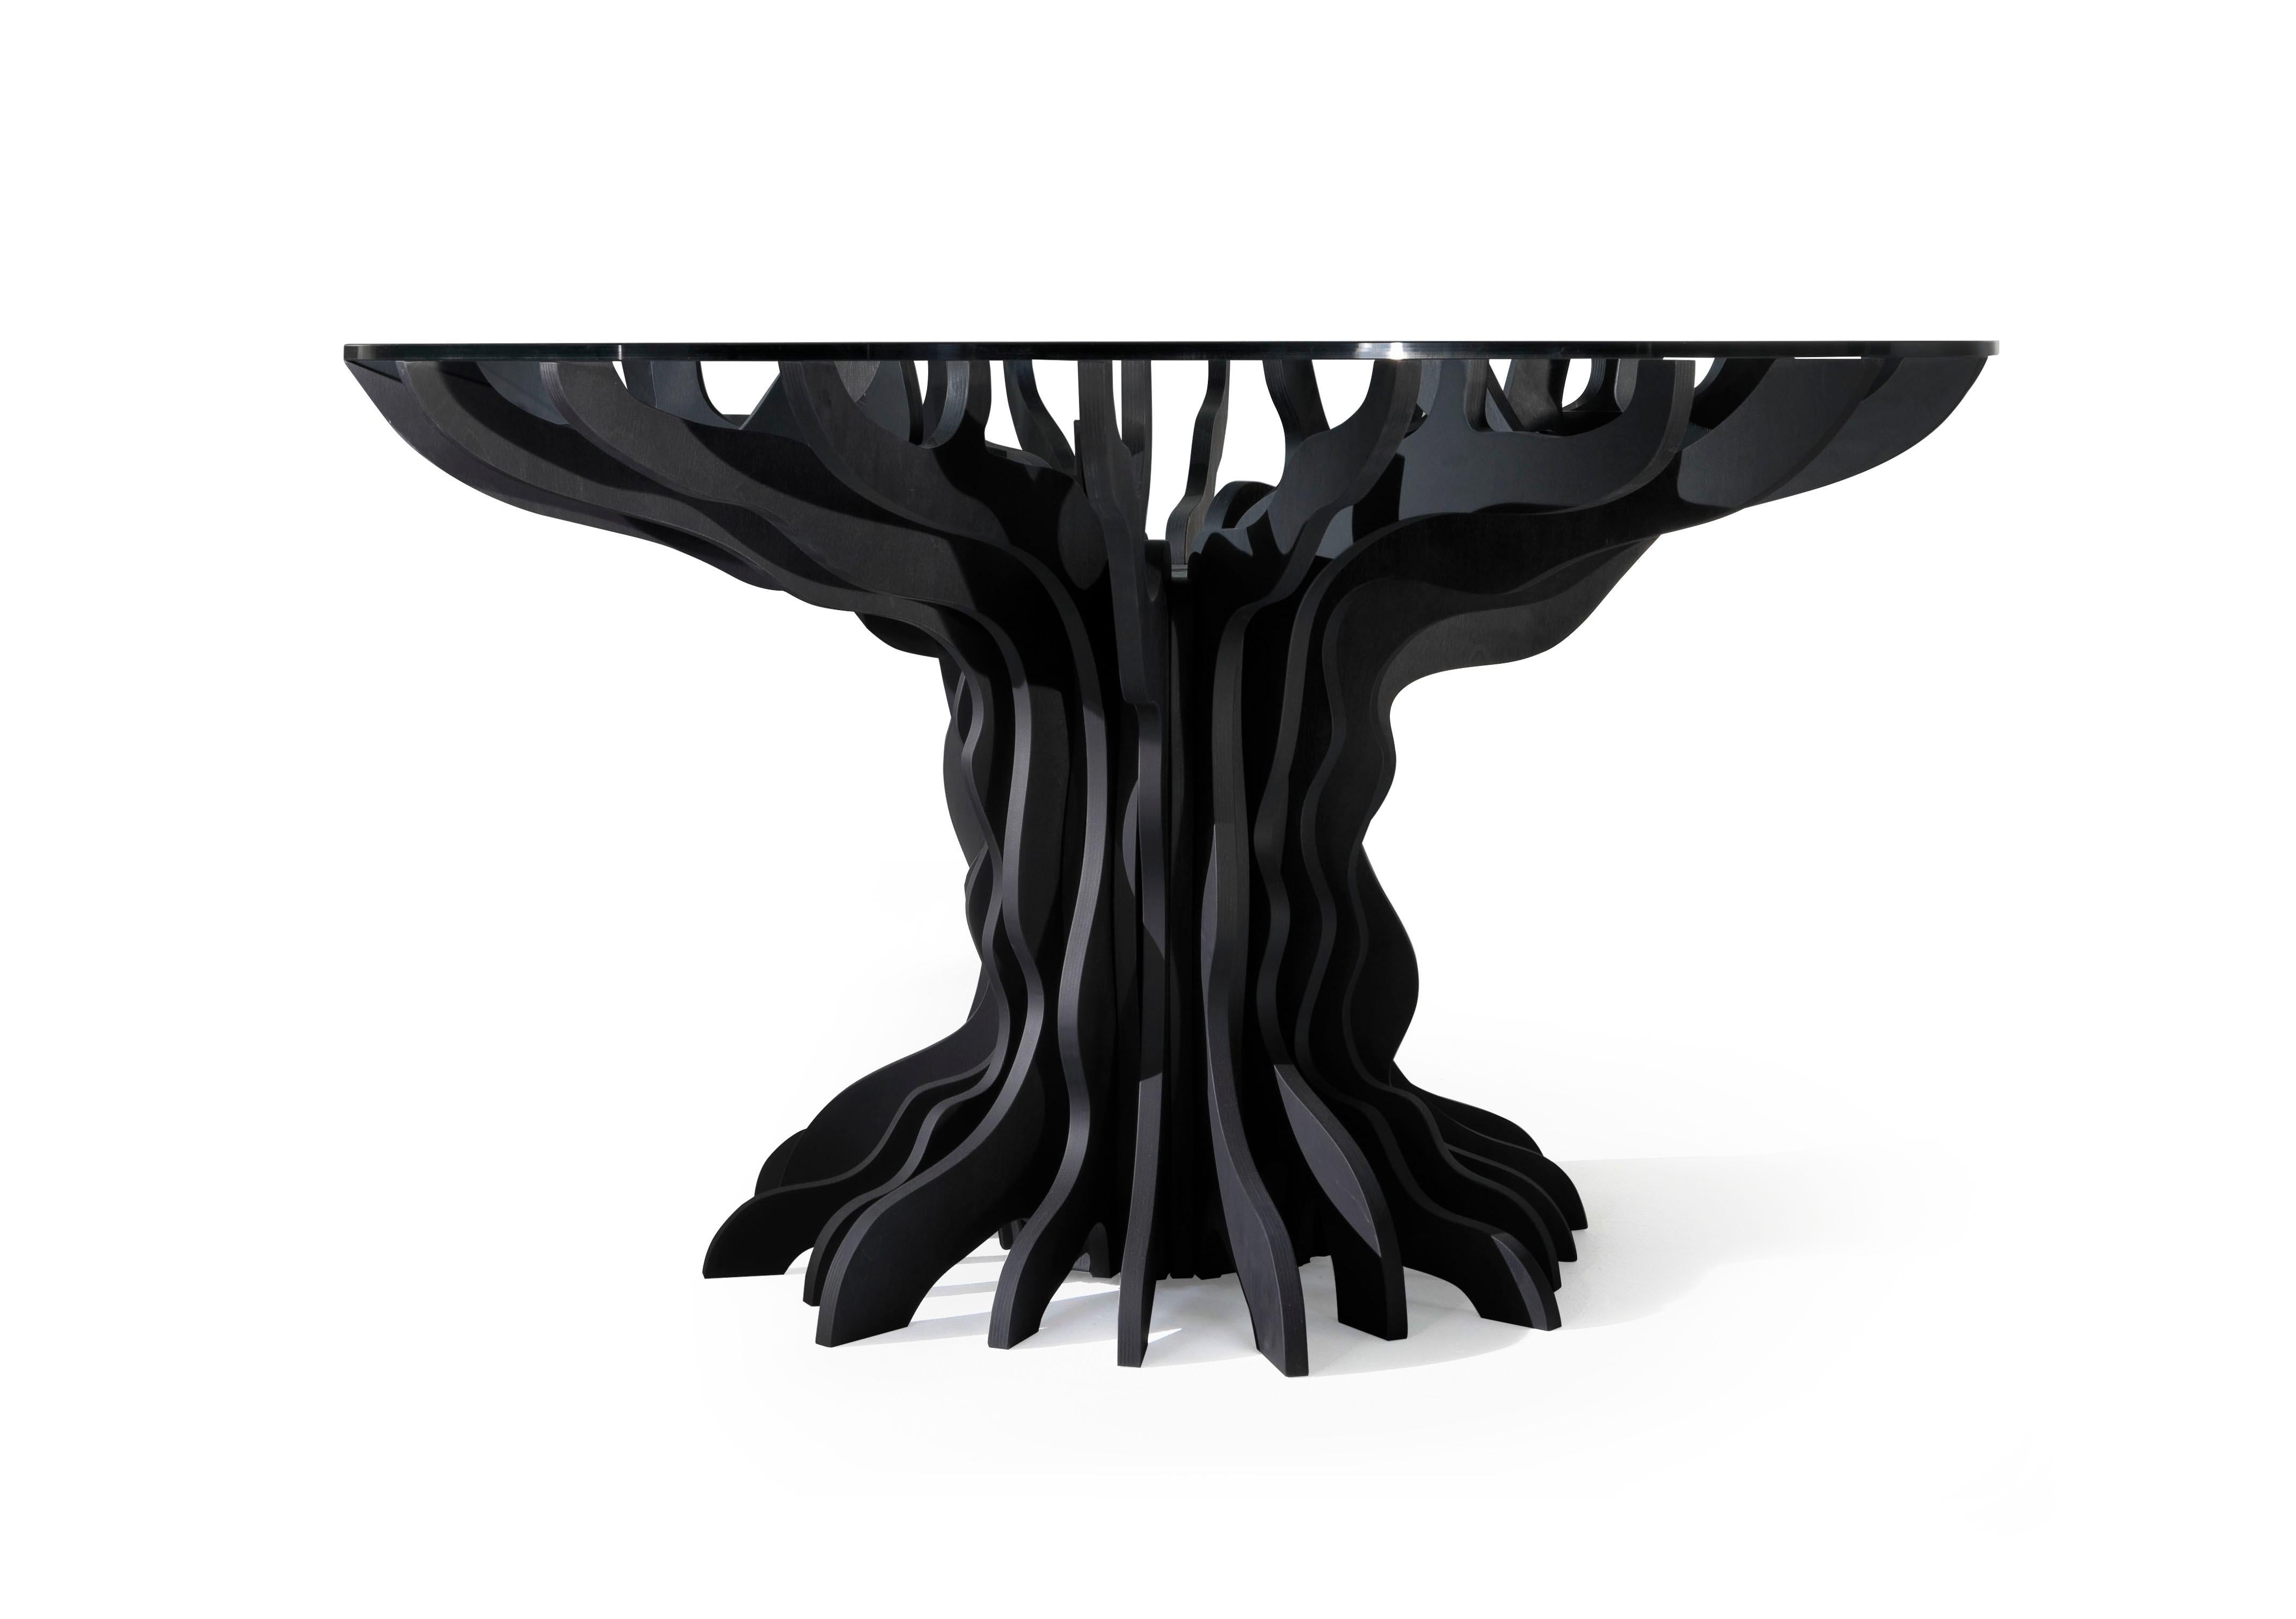 Sculptural table made of hand-finished birch plywood with natural or black painted finish. The suggested top is 140 cm in diameter but will support tops up to 180 cm in diameter